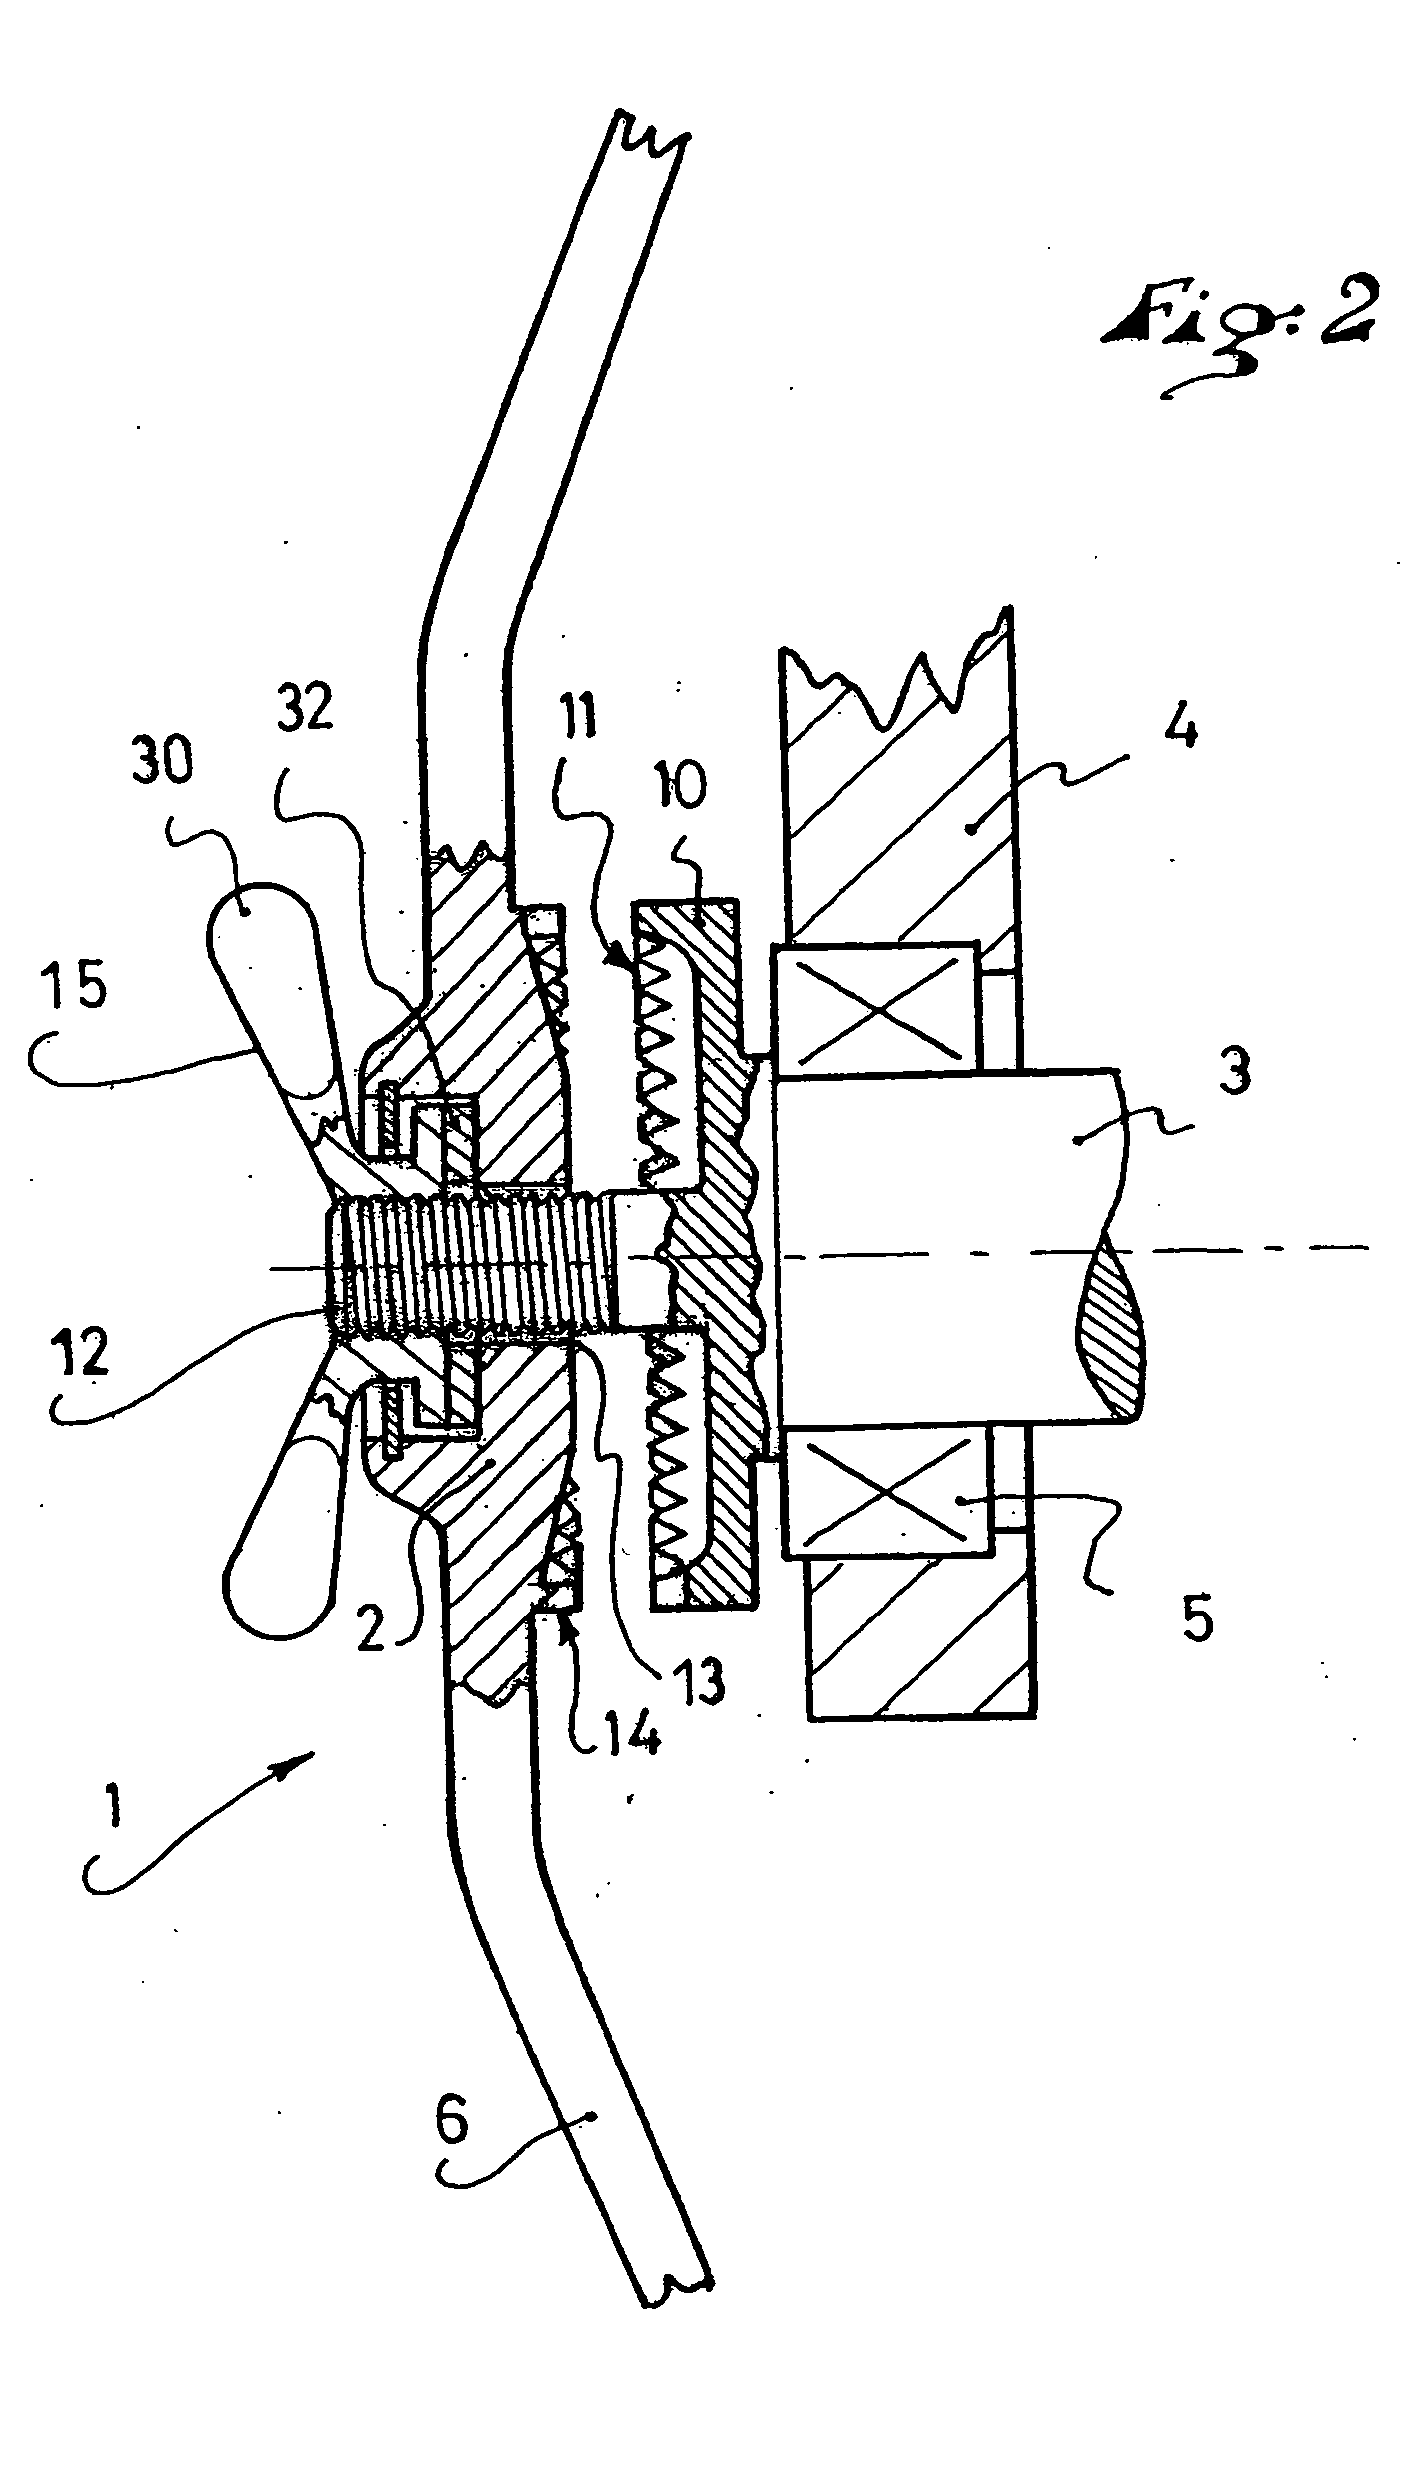 Device for mounting a wheel to the frame of a bicycle